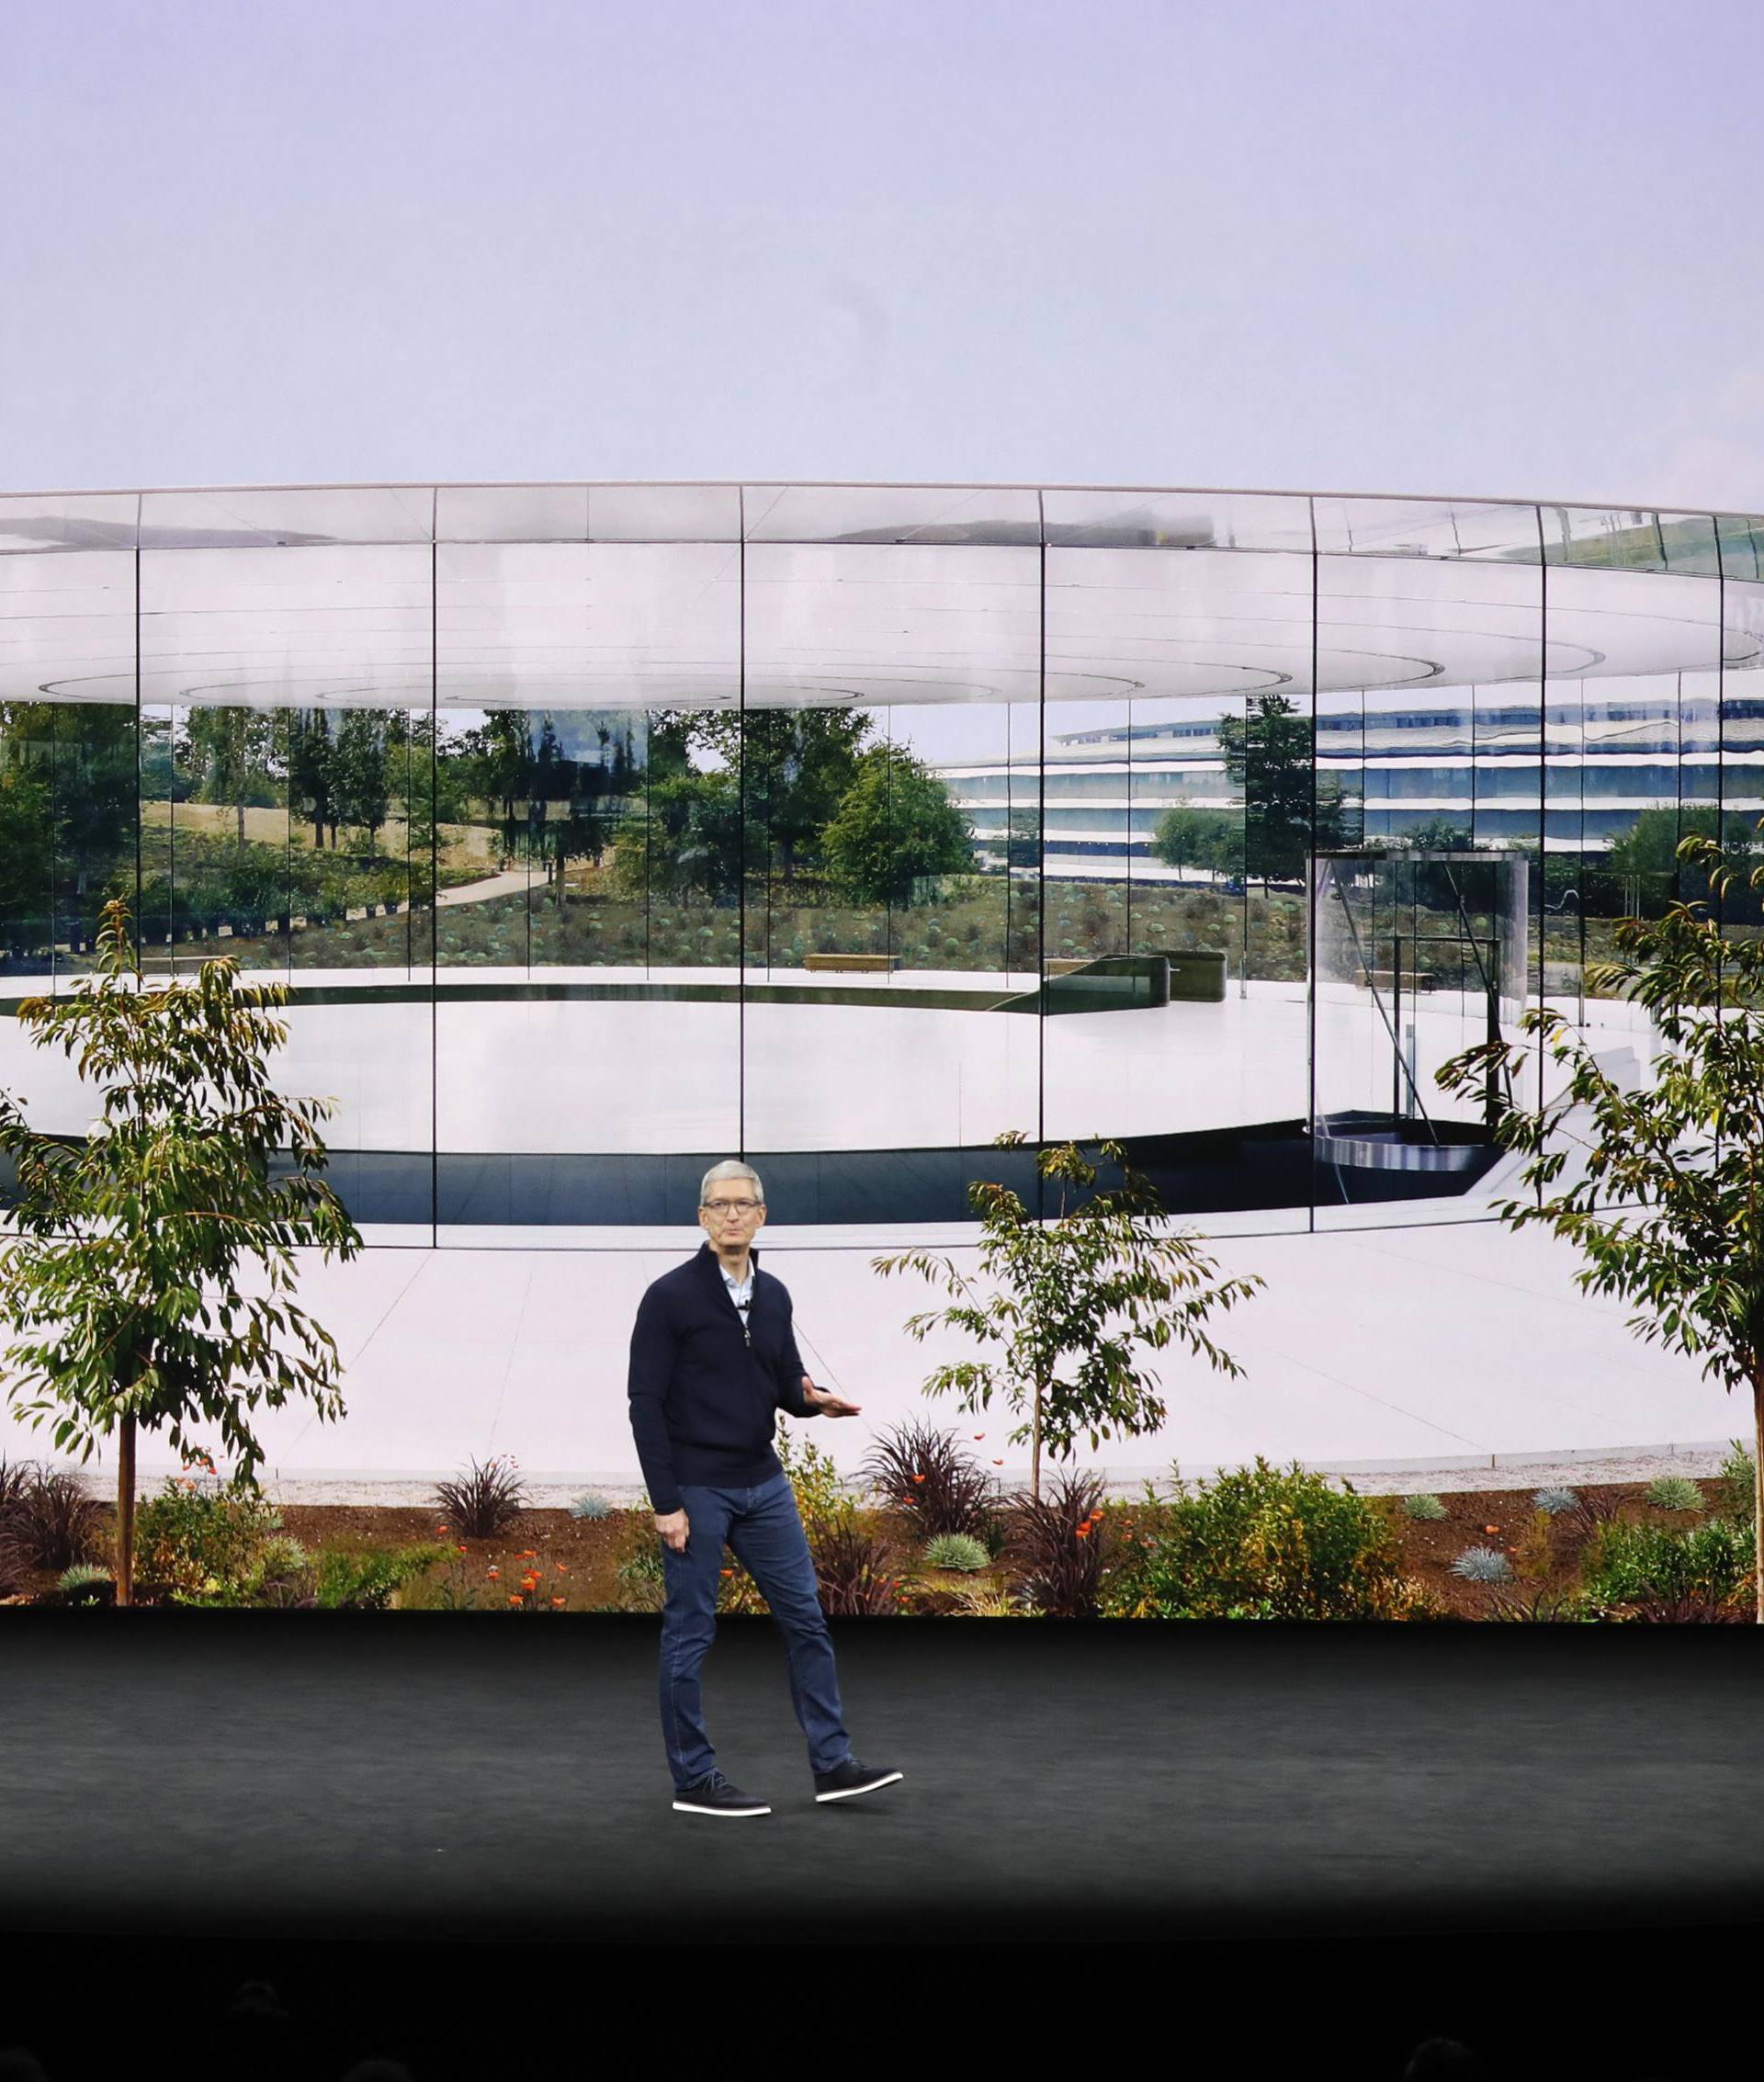 Apple's Tim Cook speaks during a product launch event in Cupertino